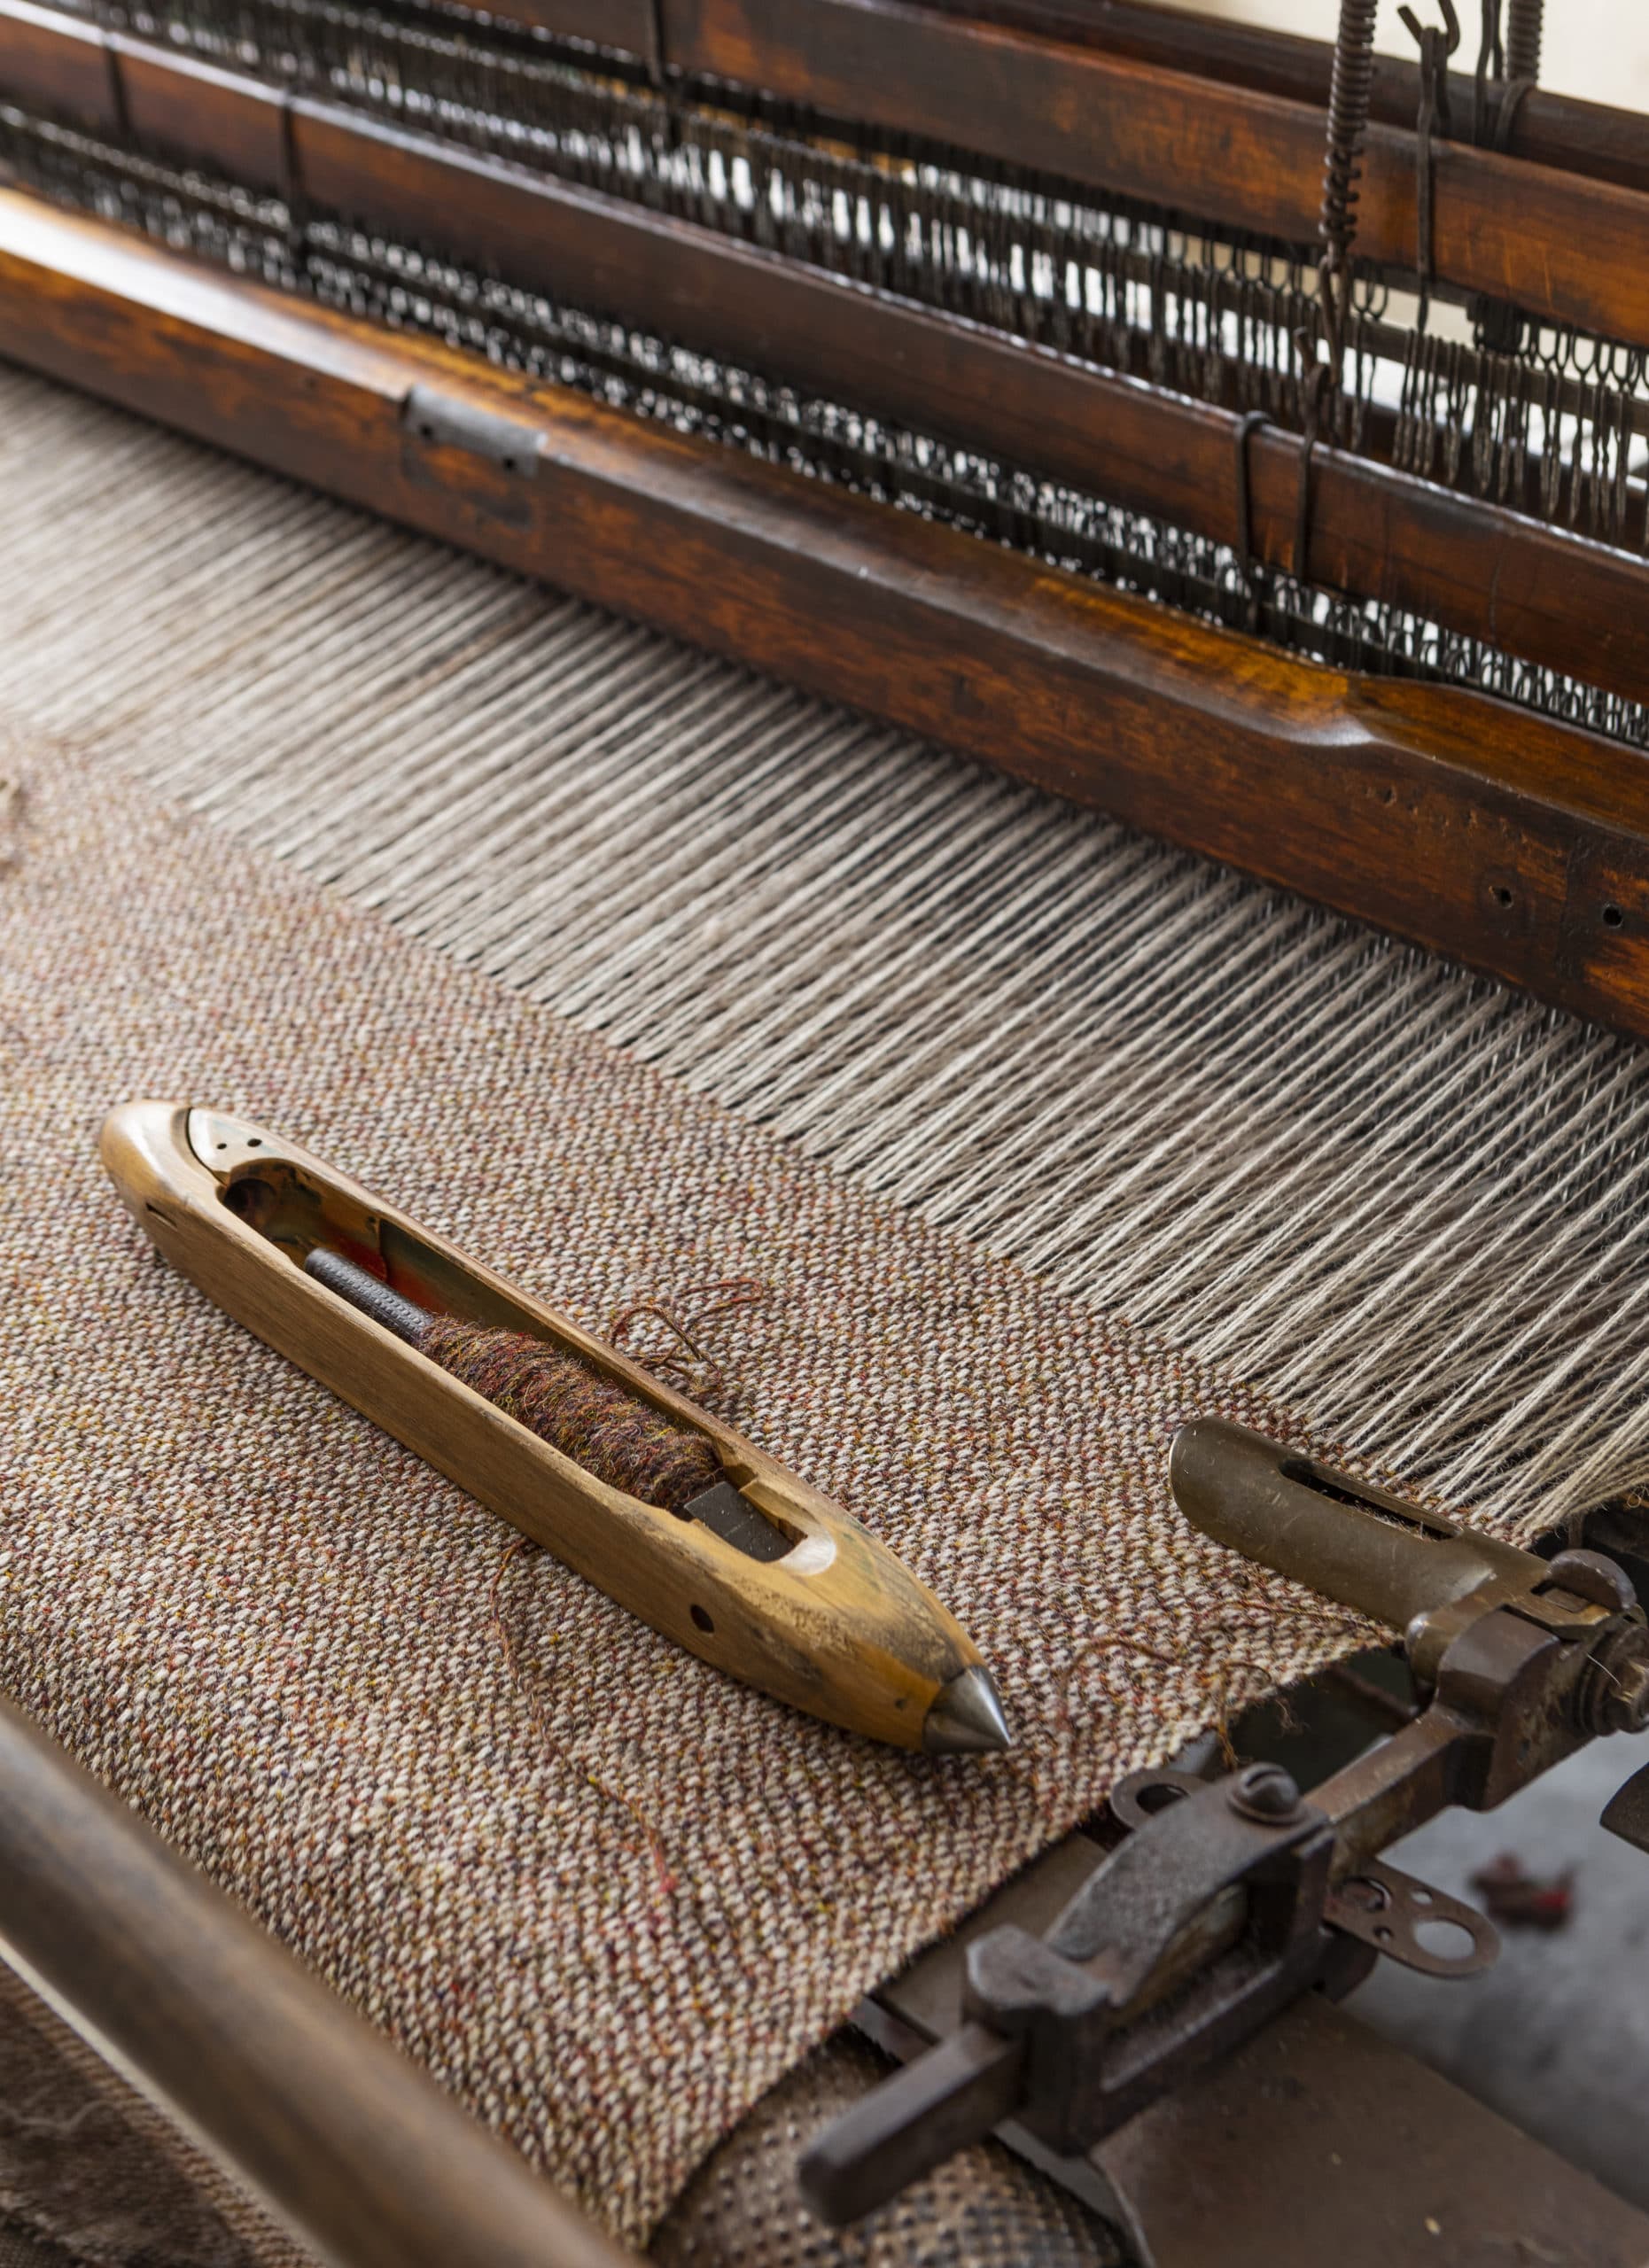 traditional weaving loom and shuttle for Tweed weaving